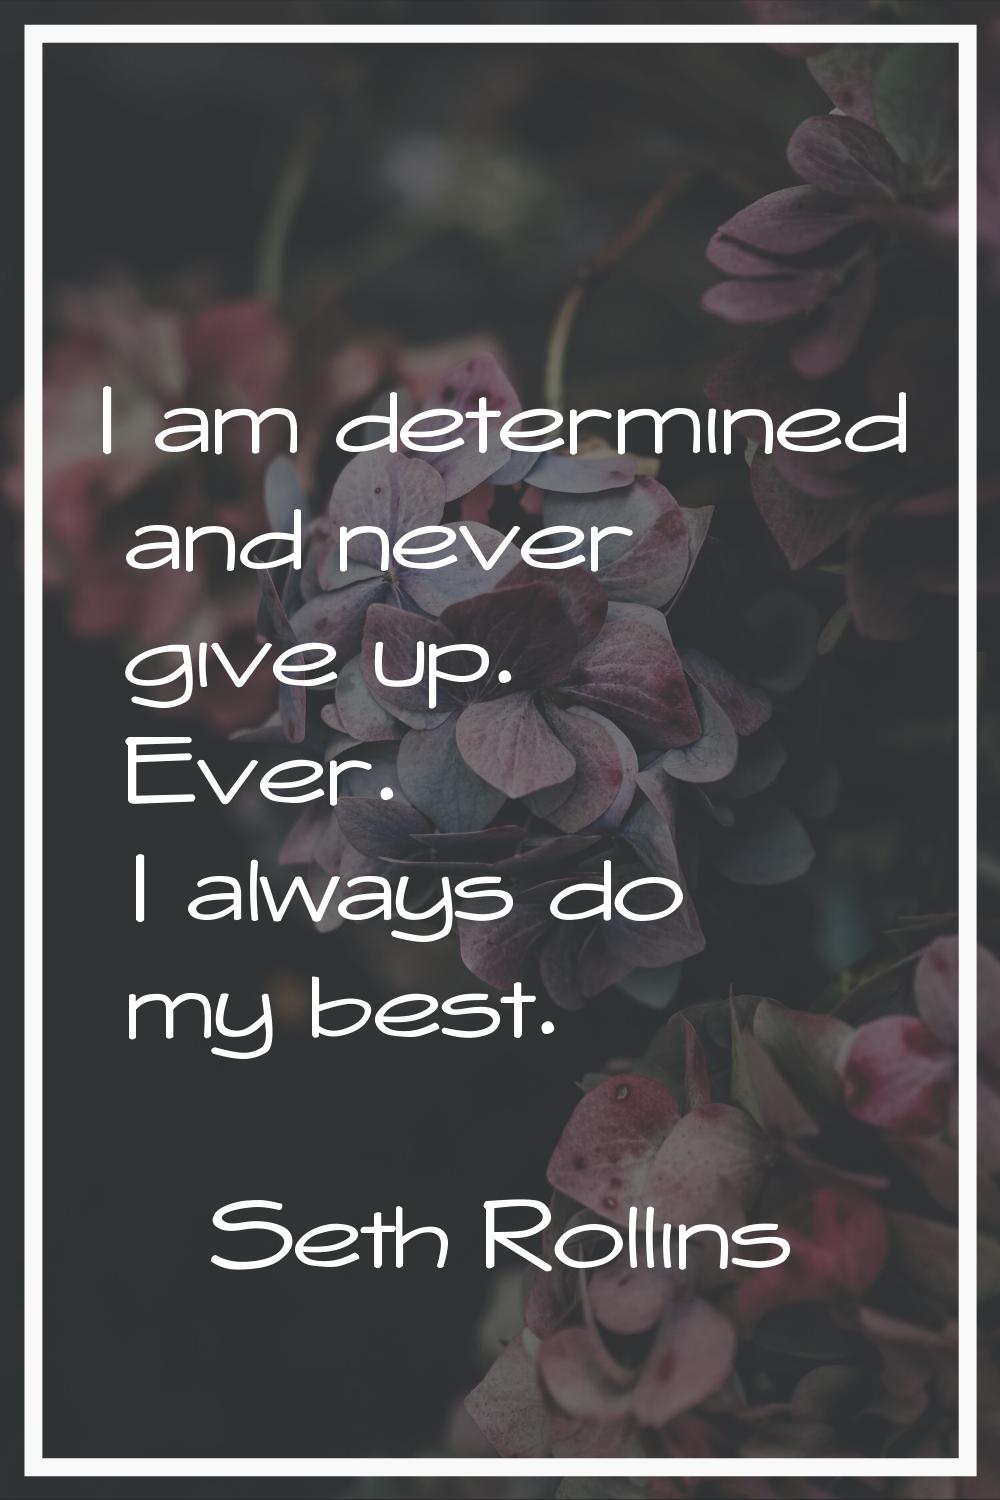 I am determined and never give up. Ever. I always do my best.